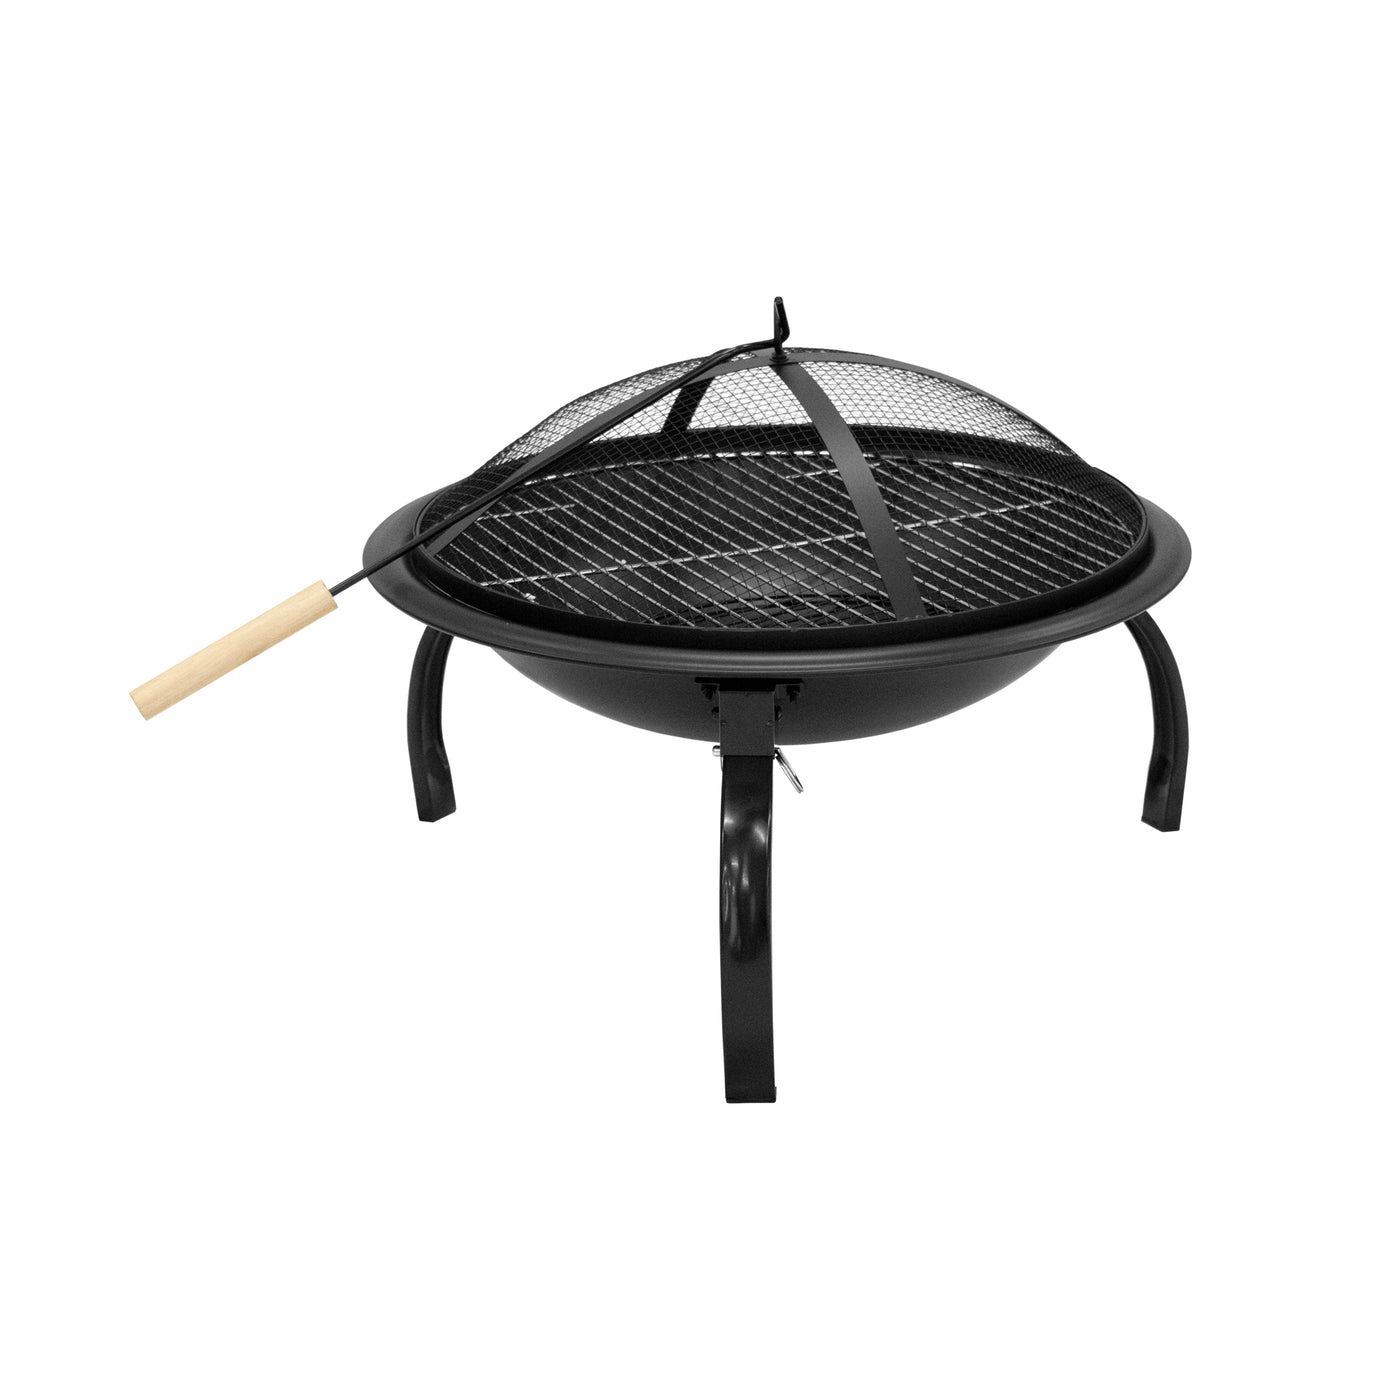 Creekside Outdoor Steel Round Fire Pit with Wire Mesh Lid